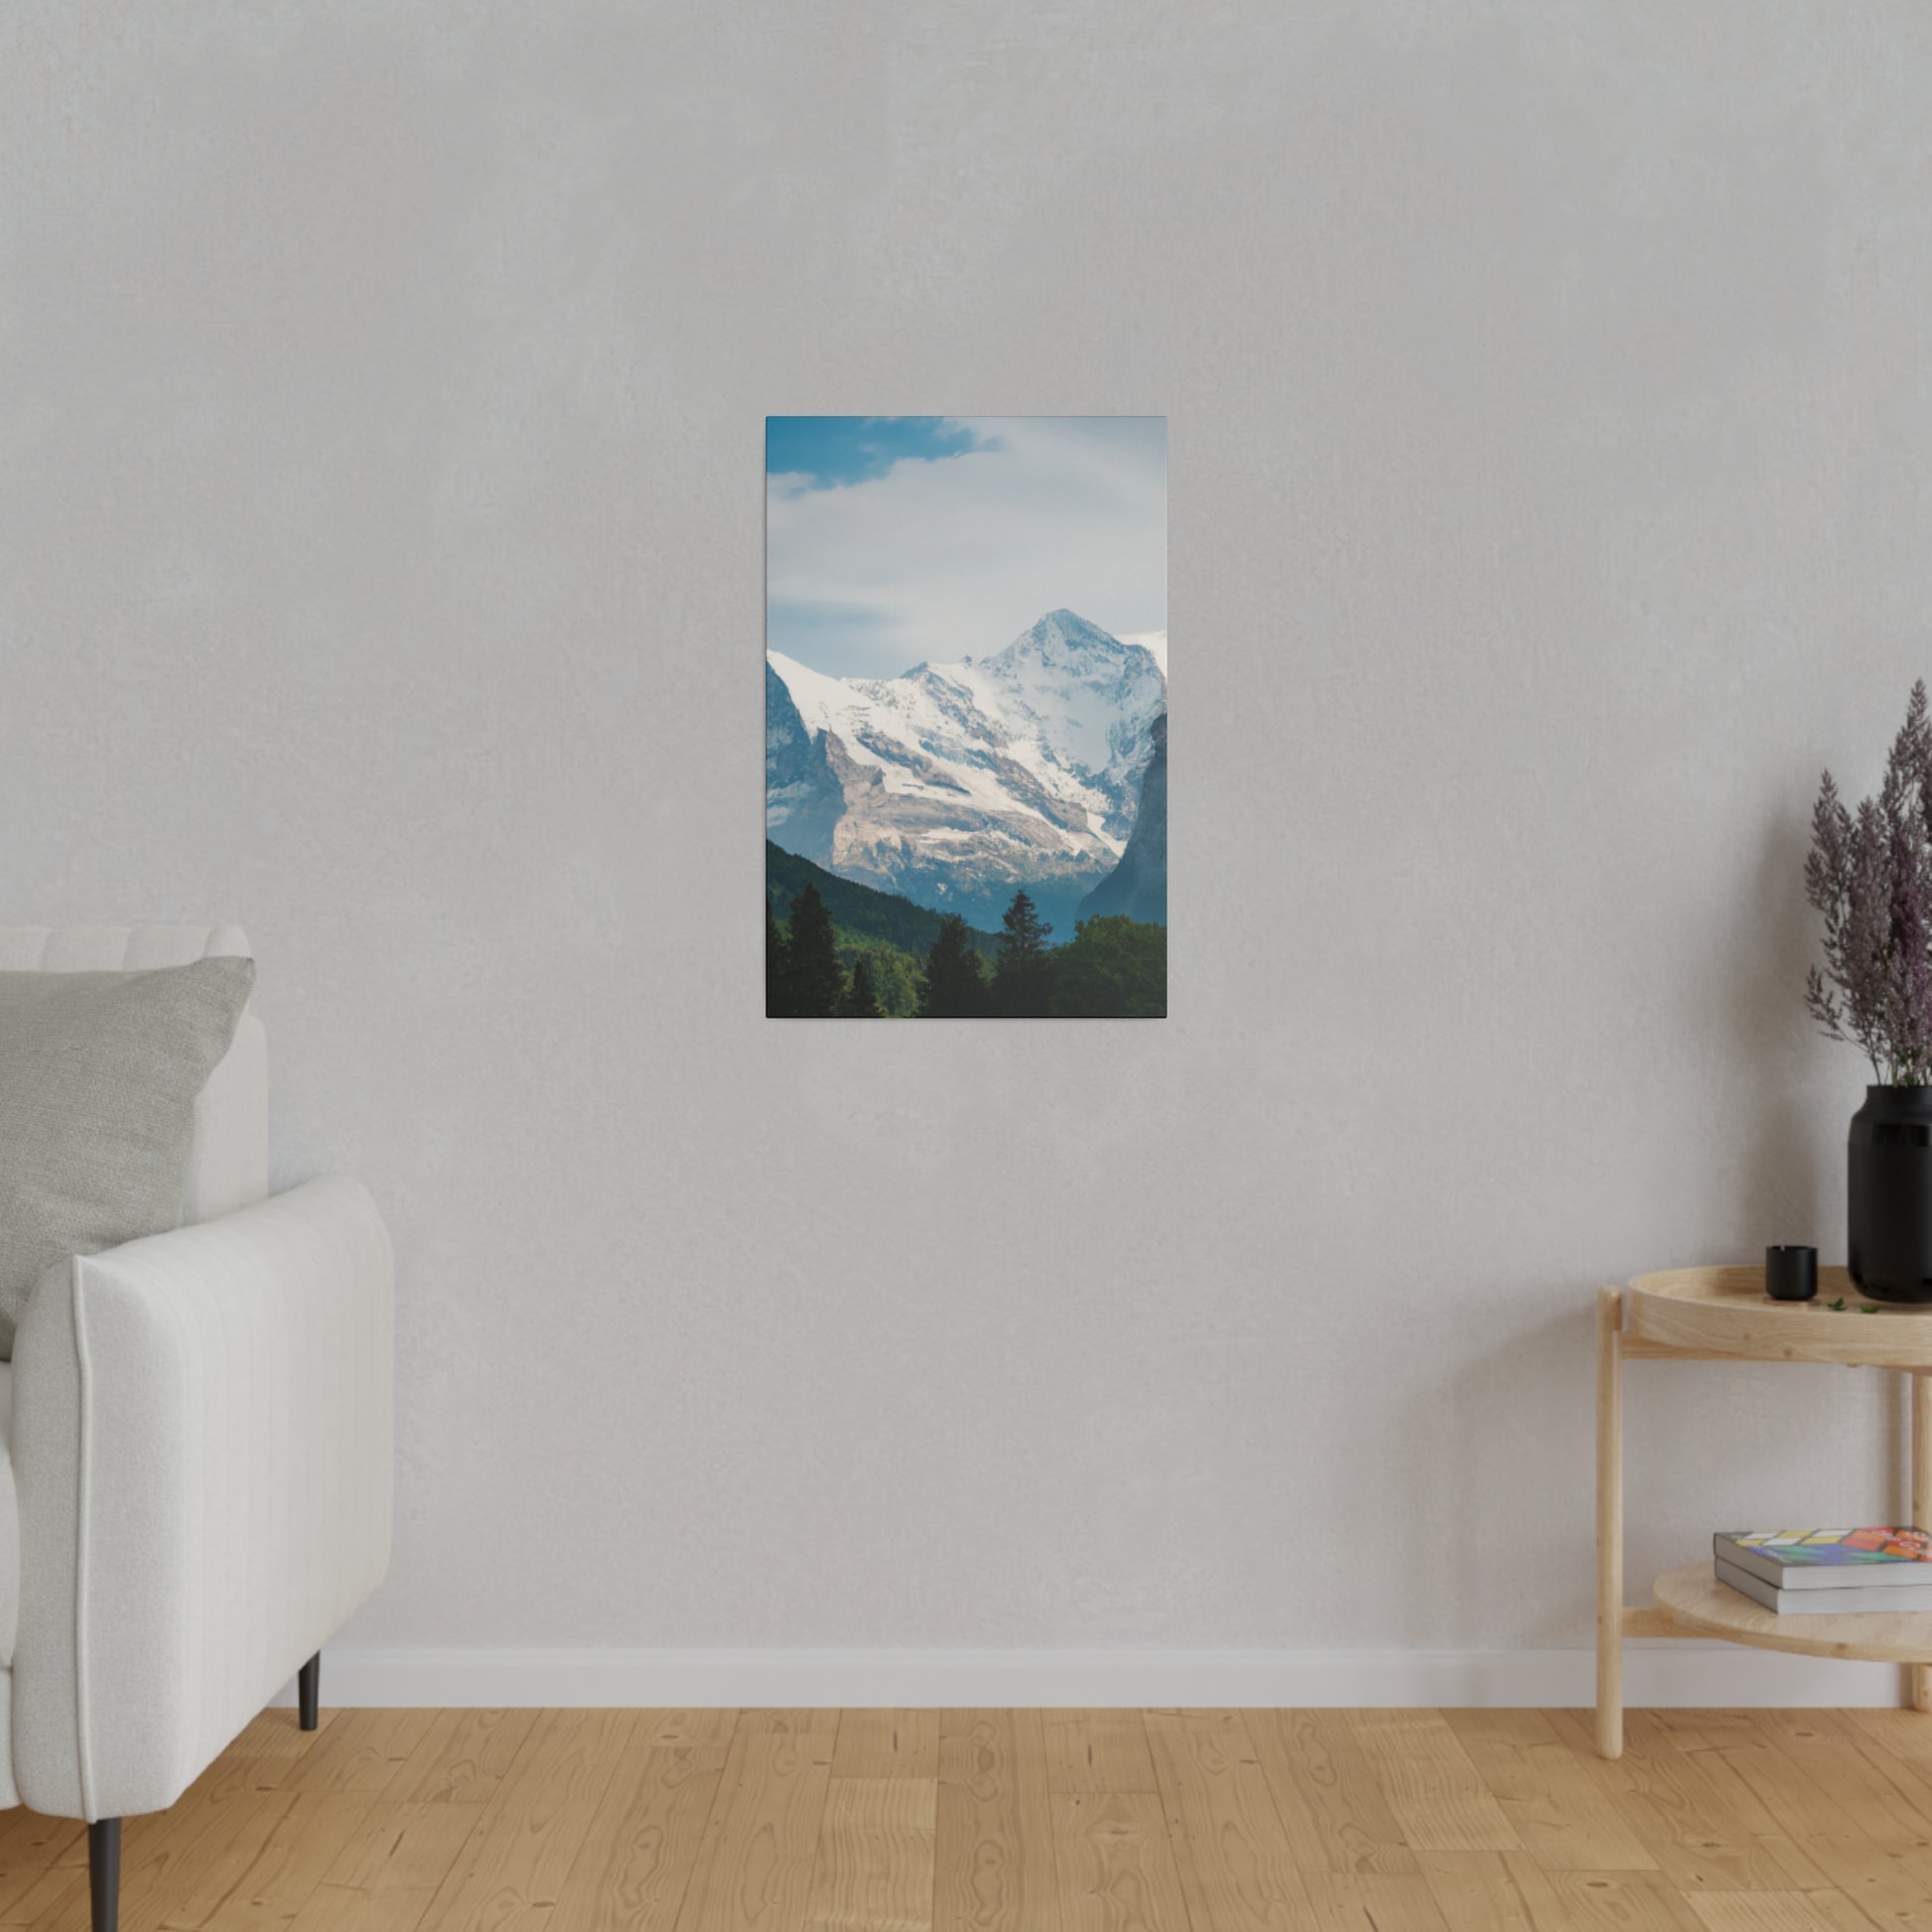 Quality canvas of a snow-capped mountain and forests, complete with ethical pine frame and pre-installed back hanging.